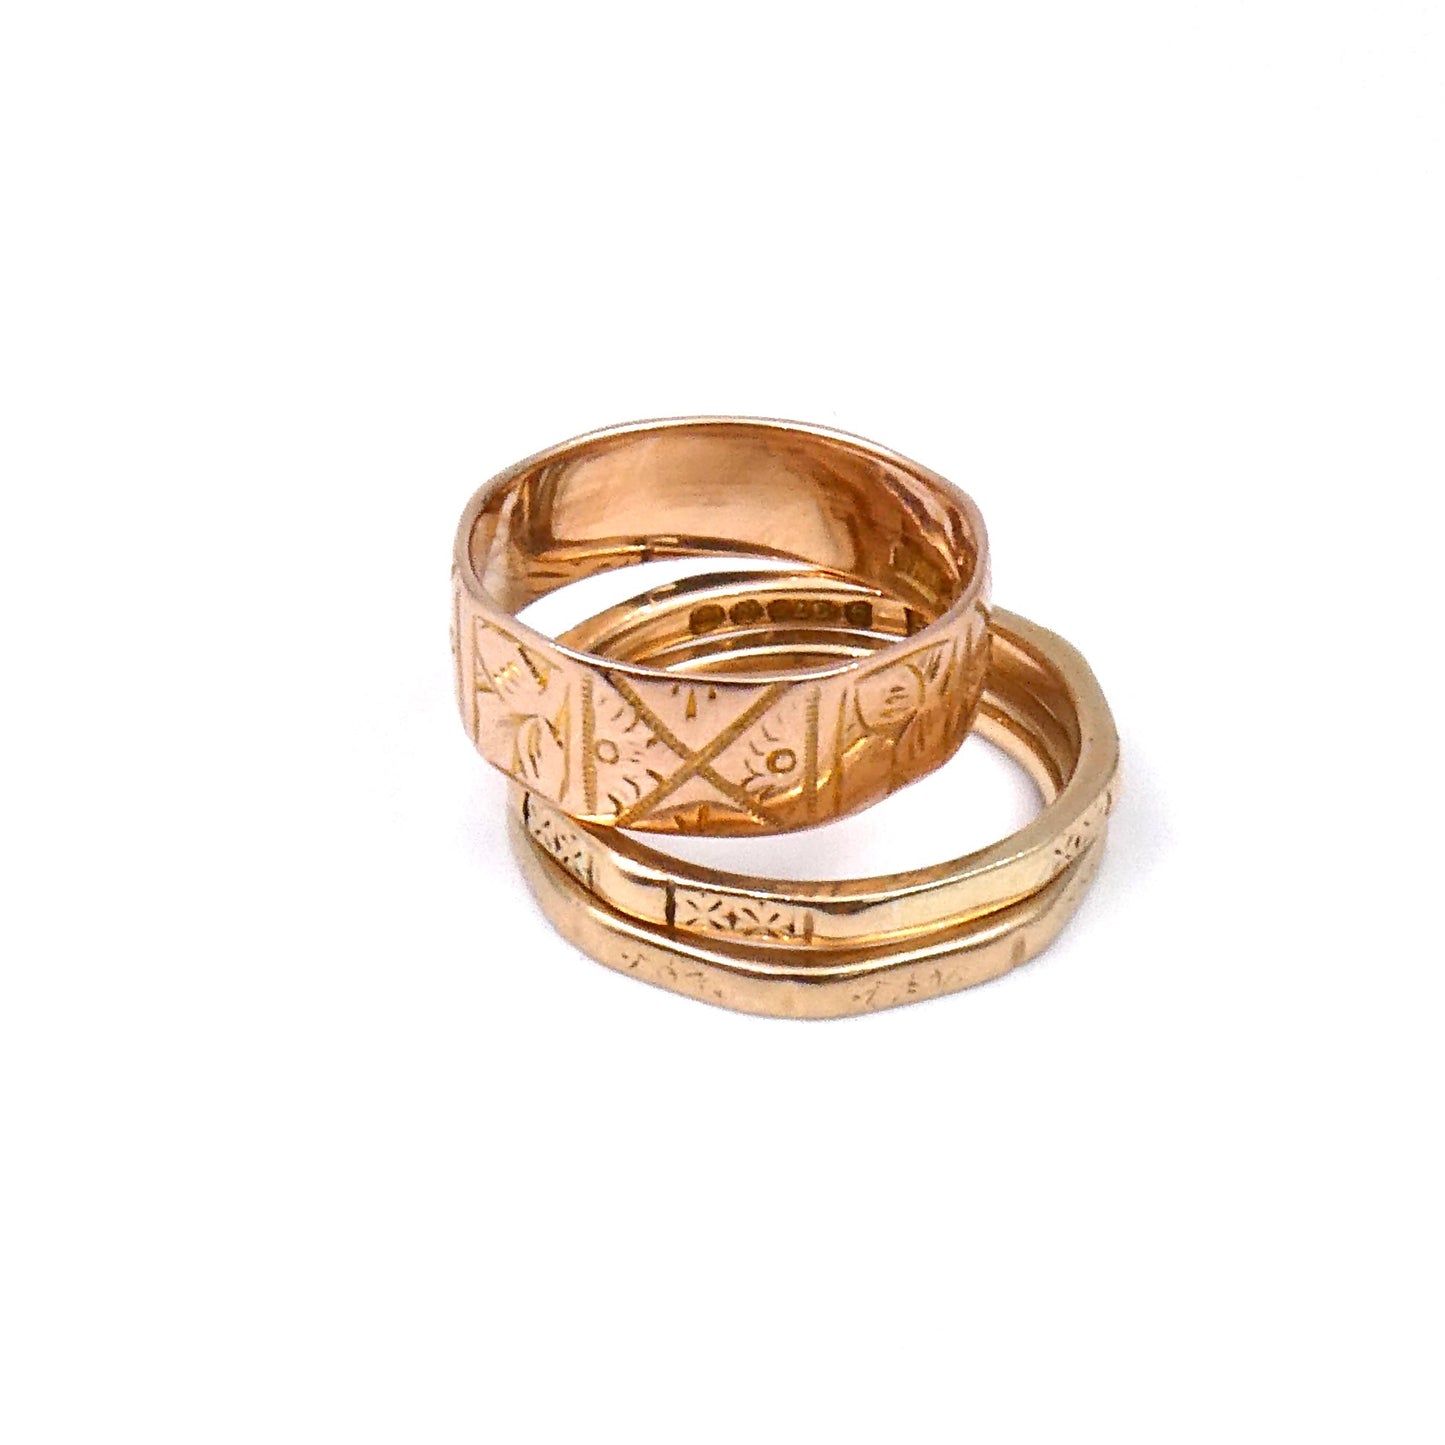 Octagon ring with a faded engraving on each of its faces. - Collected